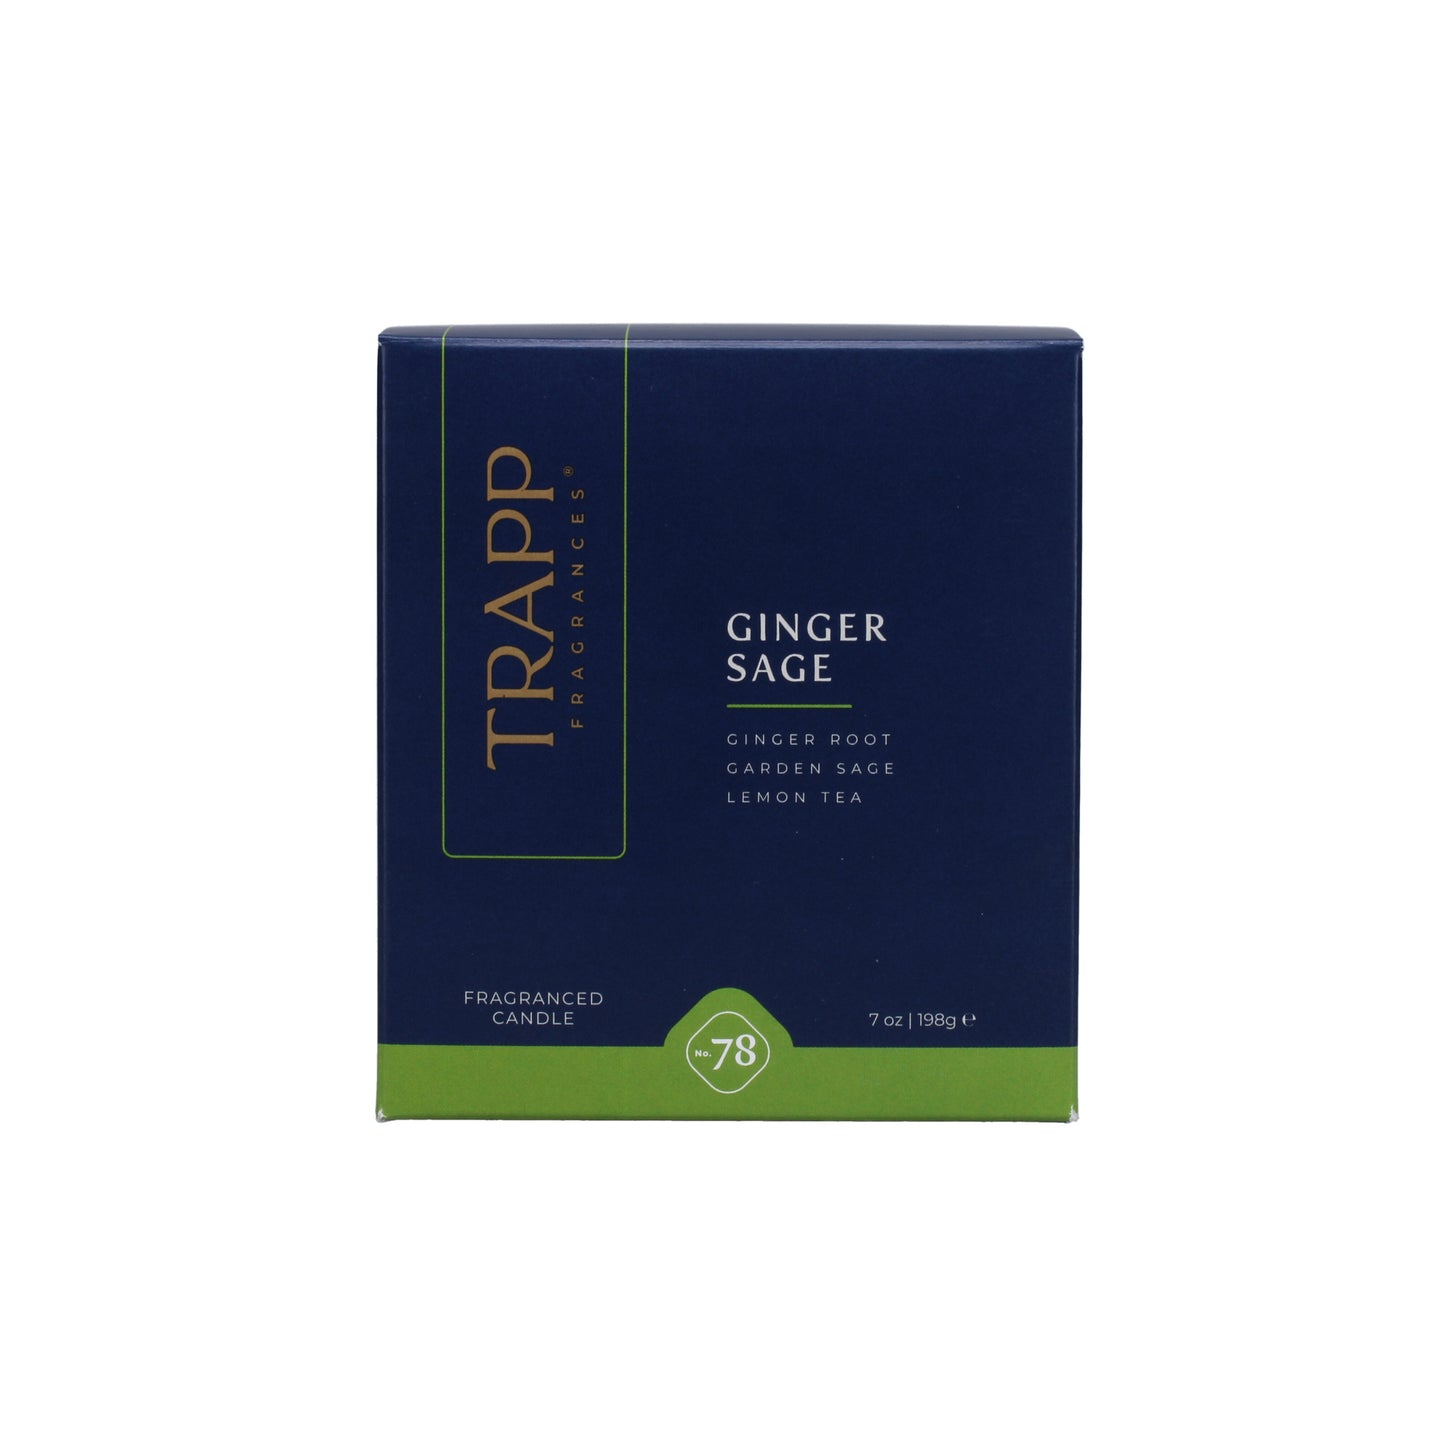 No. 78 Ginger Sage 7 oz. Candle in Signature Box Image 3